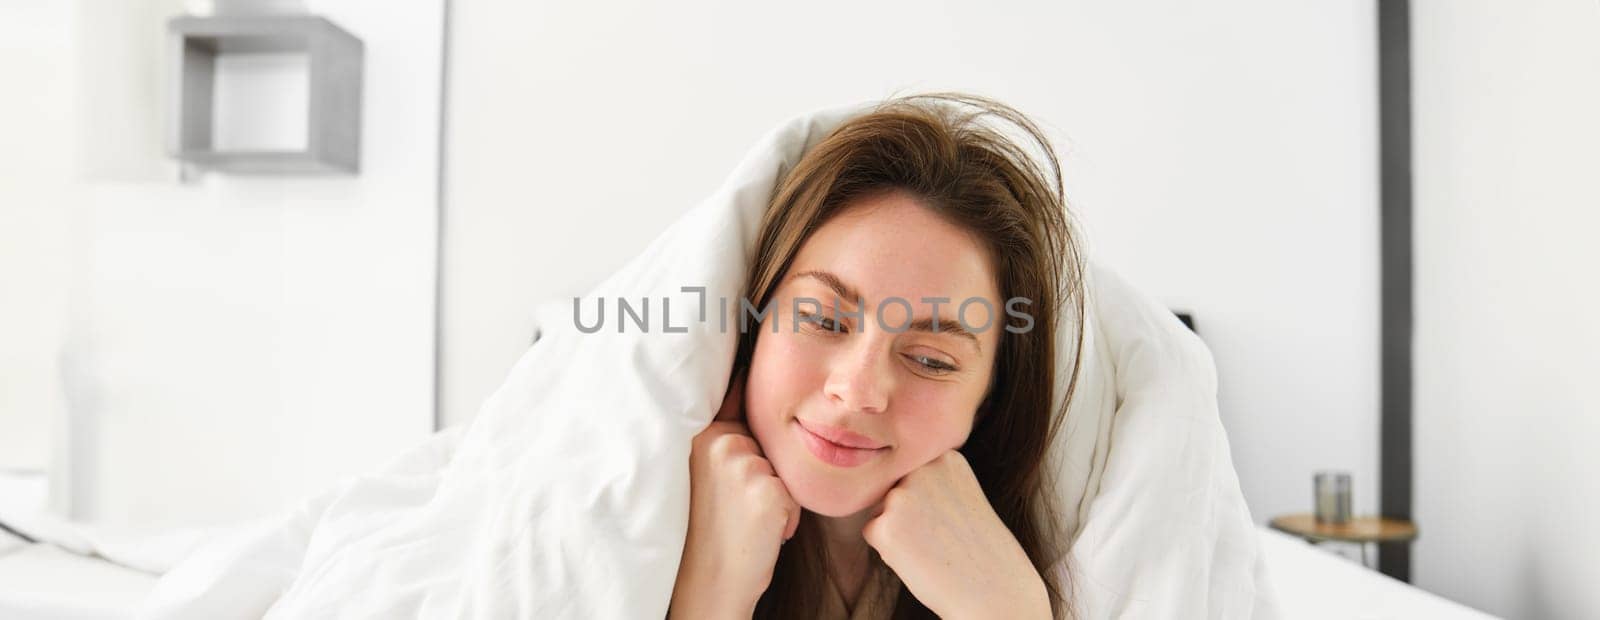 Cute girl with messy hair, lying in bed covered in white sheets duvet, smiling and laughing coquettish, spending time in her bedroom.